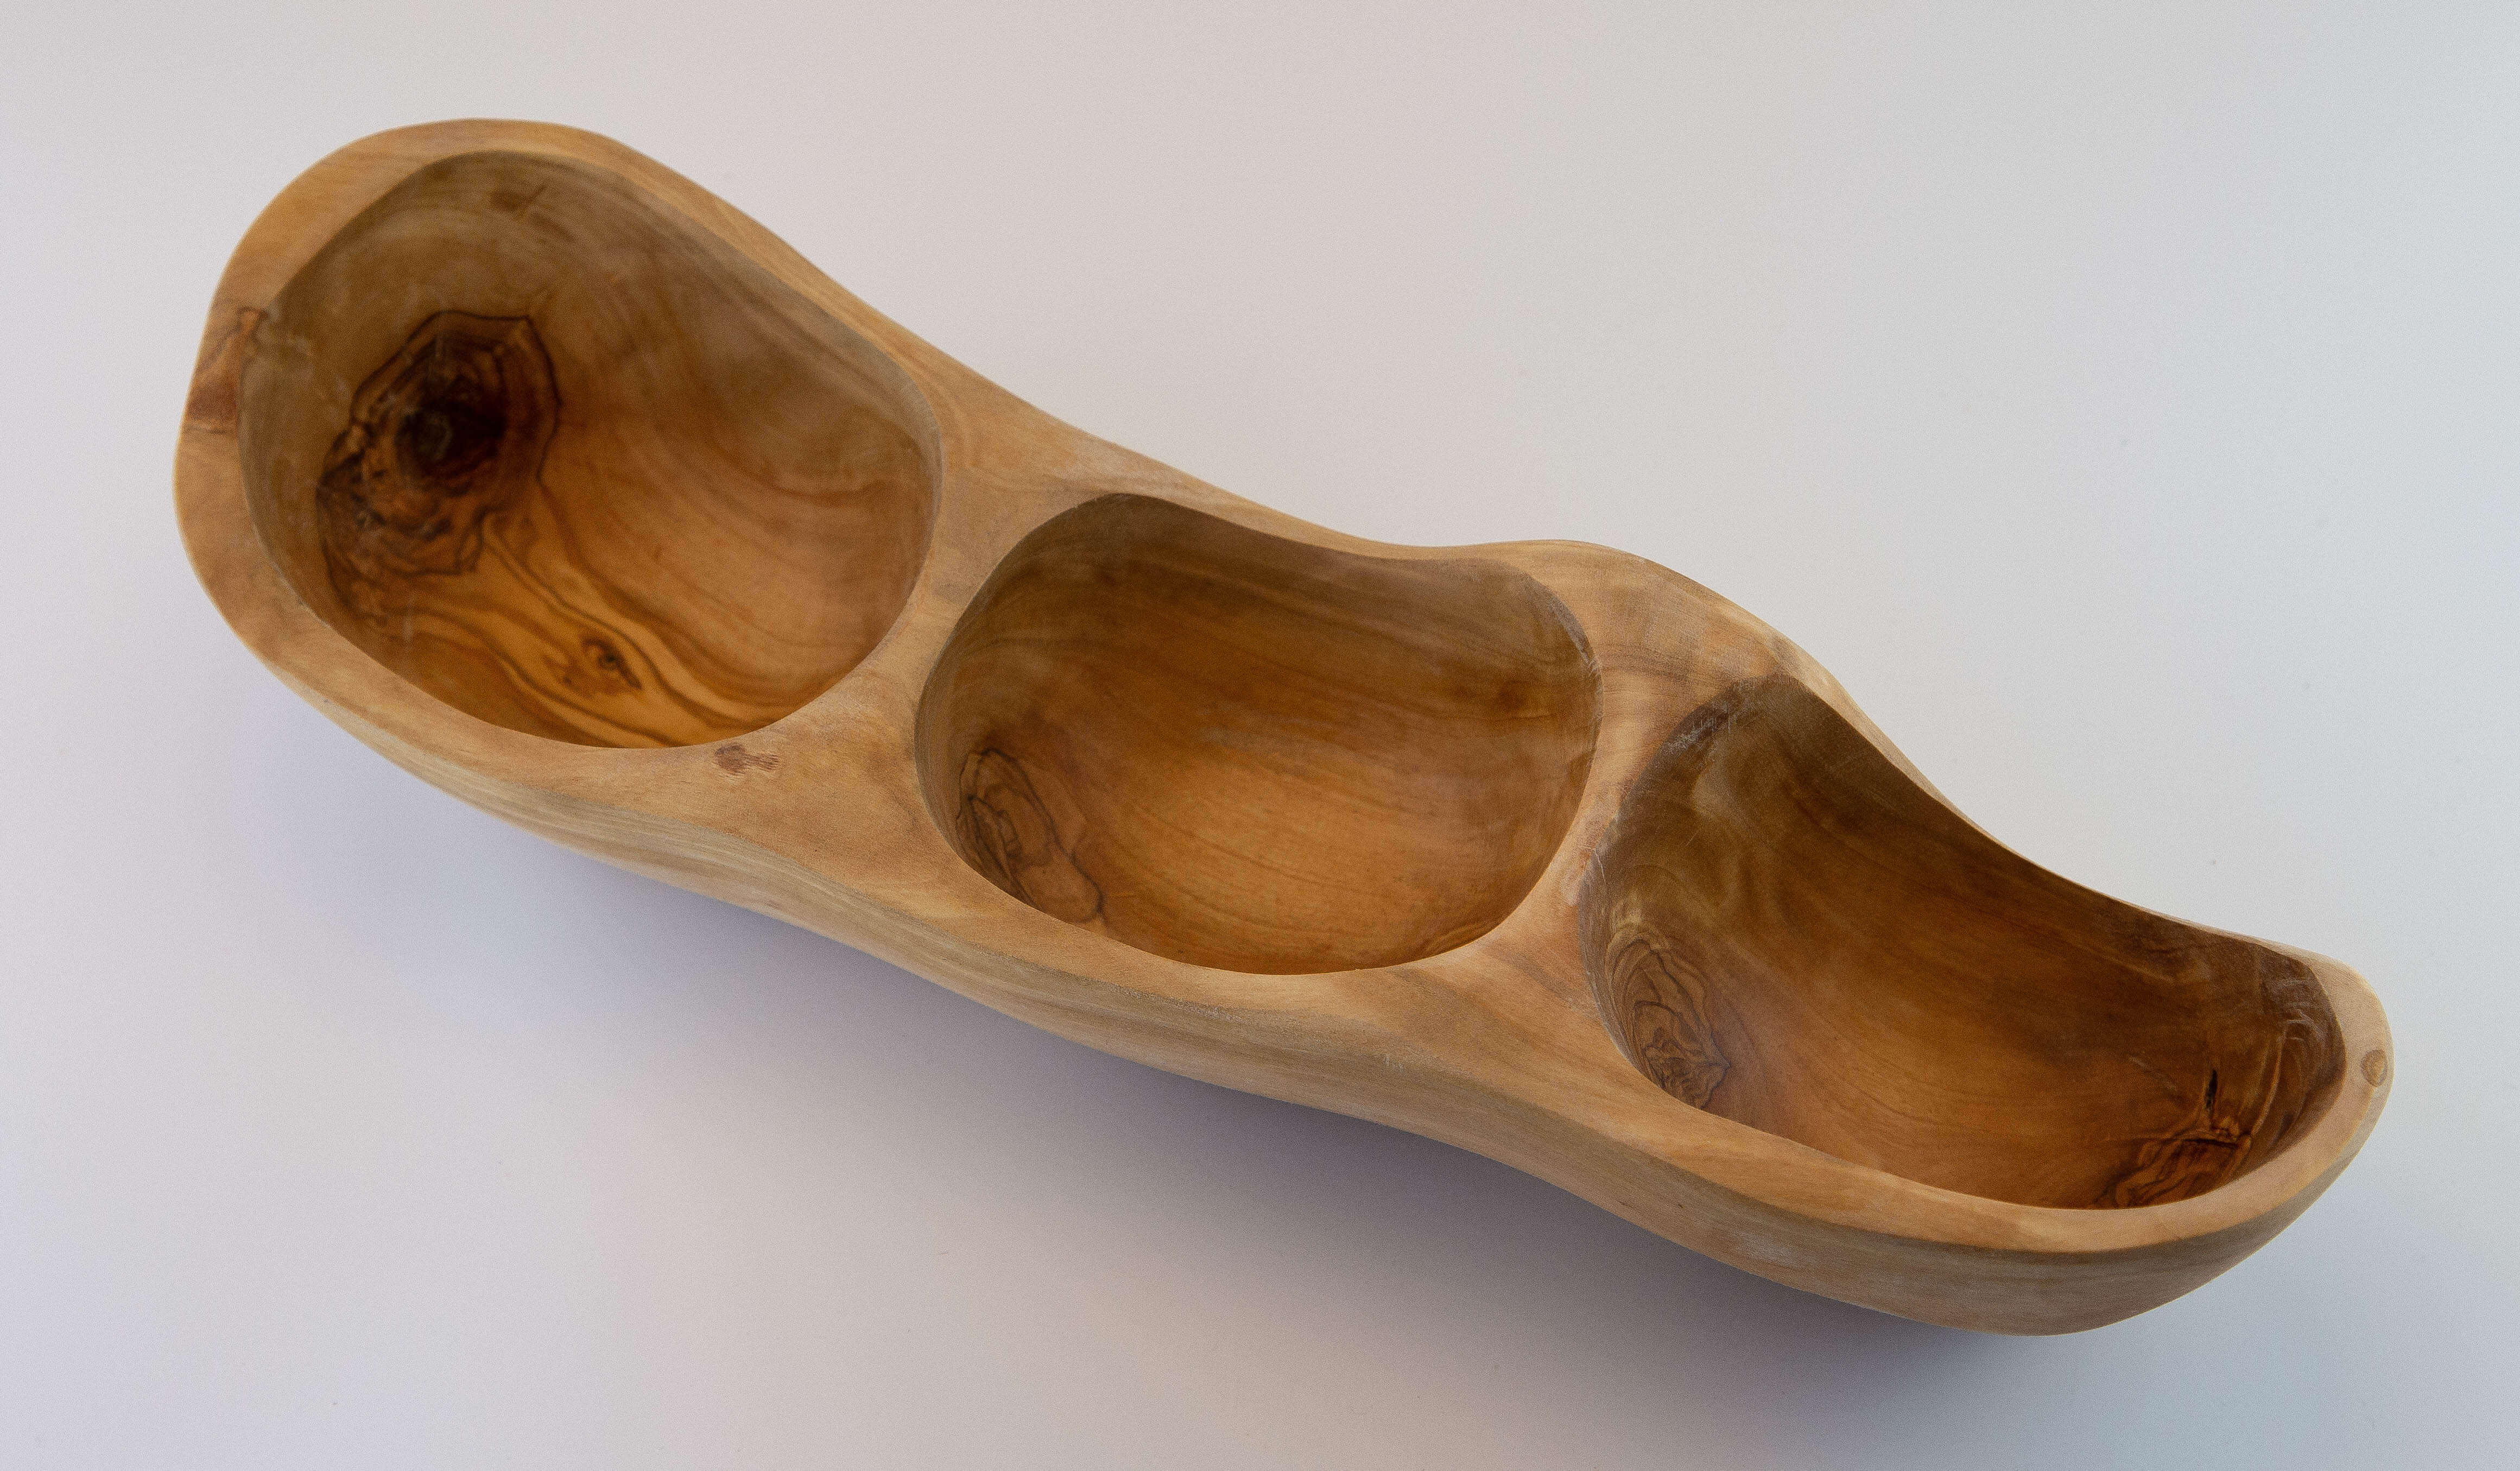 Snack olive wood bowl rustic with 3 compartments (30-35 cm)